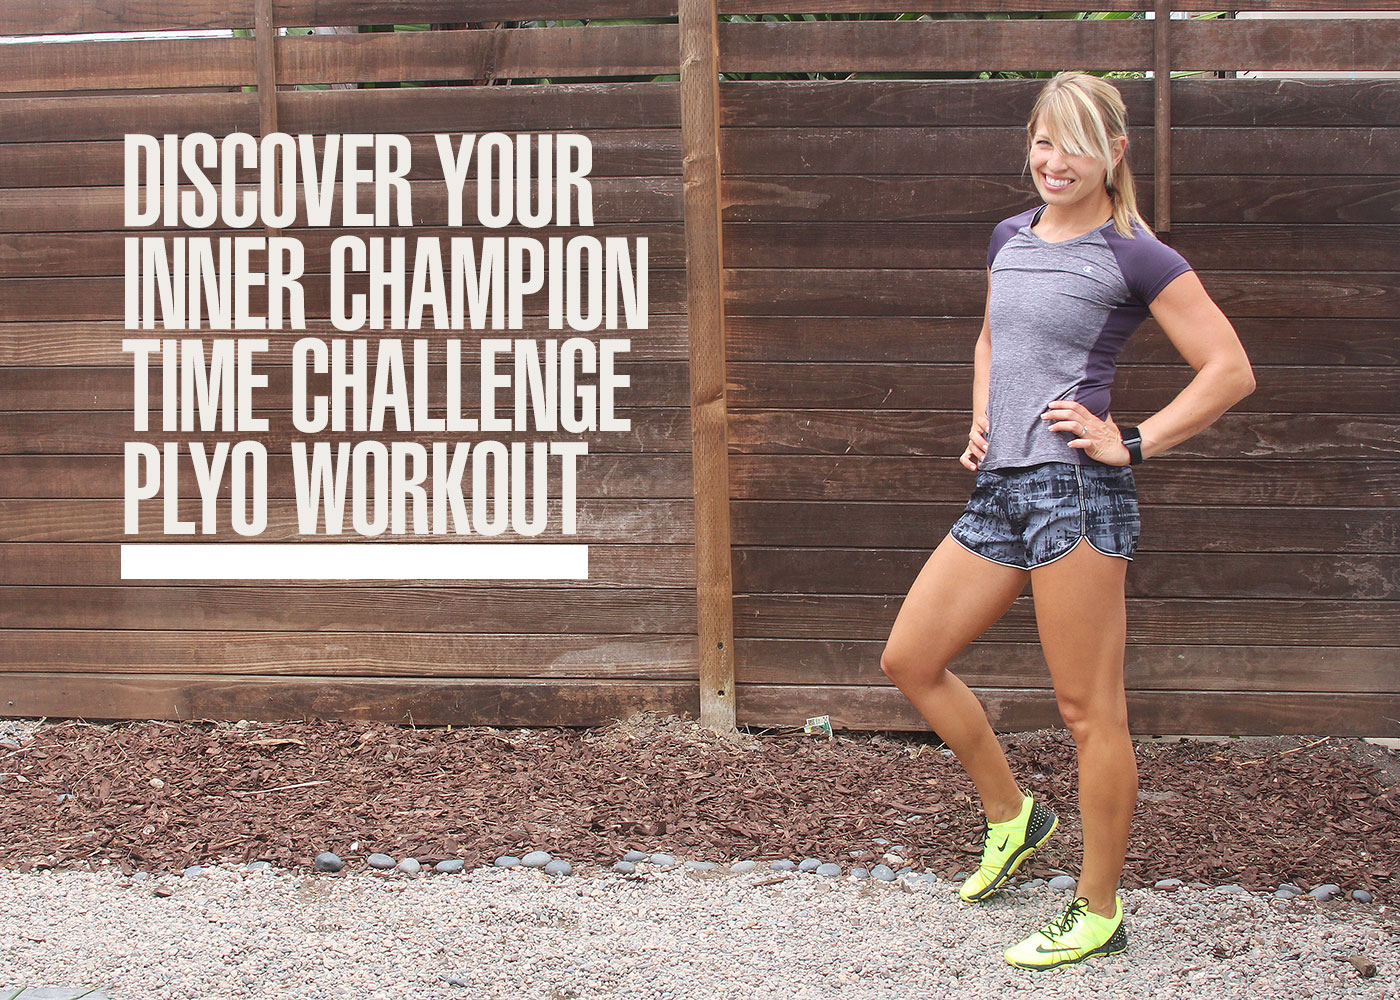 Discover Your Inner Champion Time Challenge Plyo Workout